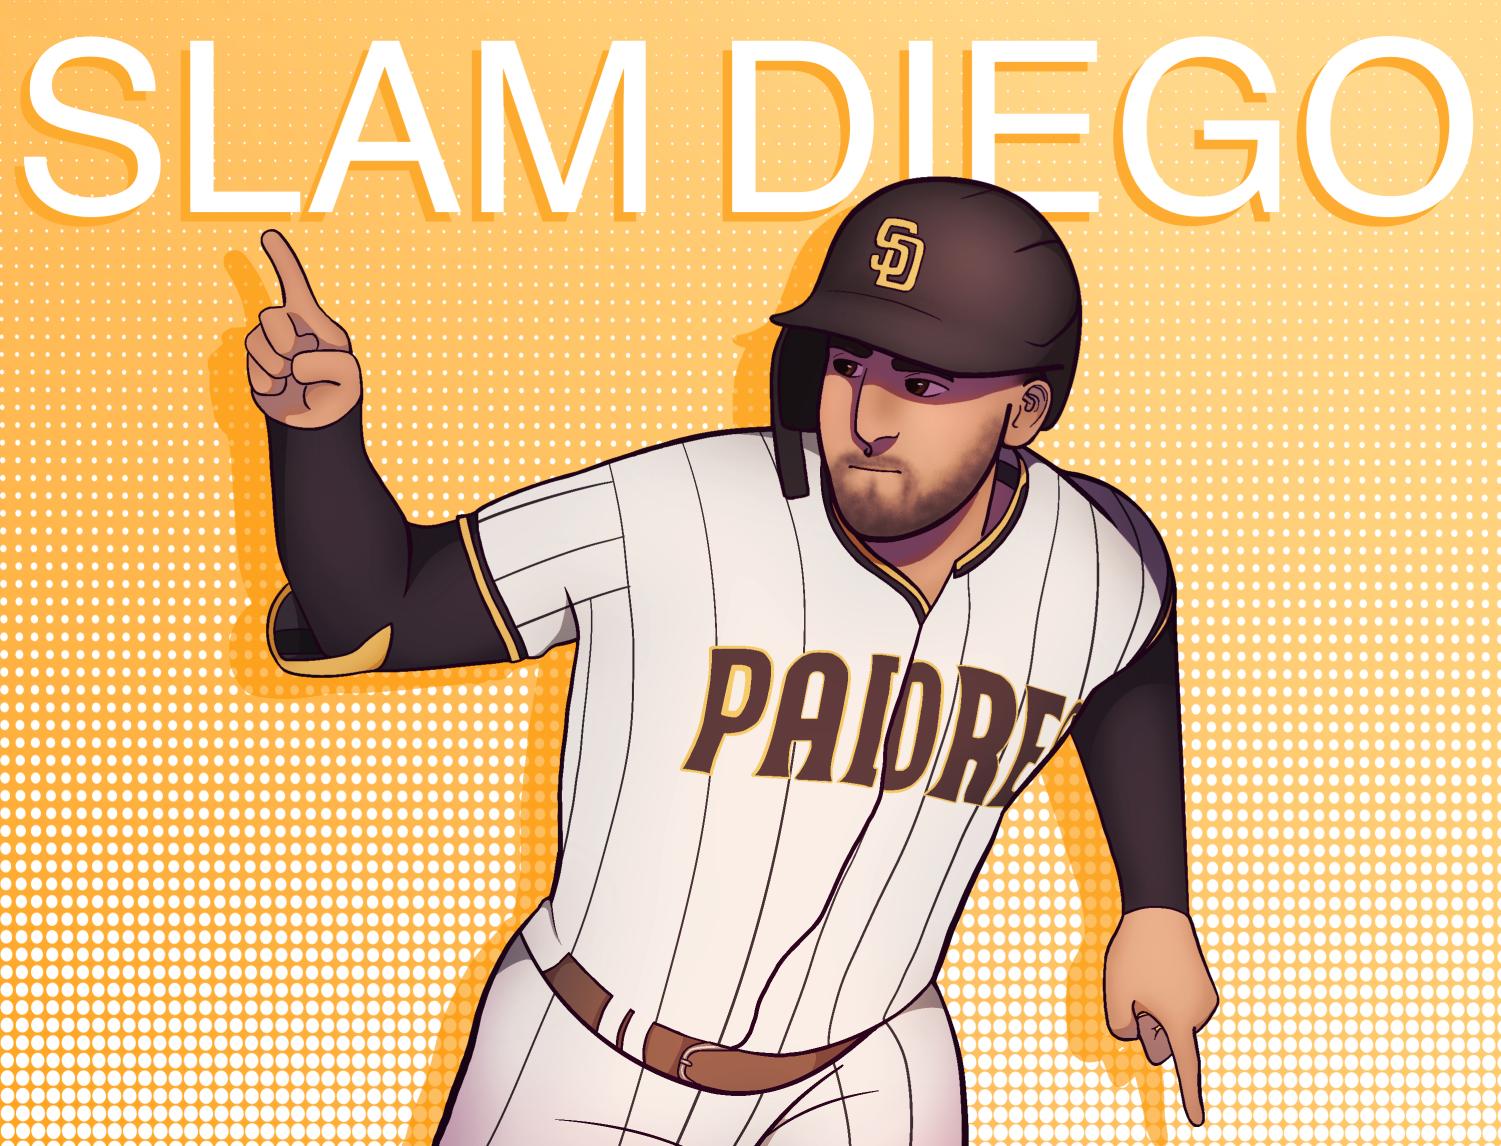 Blake Snell, Trent Grisham lead Padres over Dodgers to take 2-1